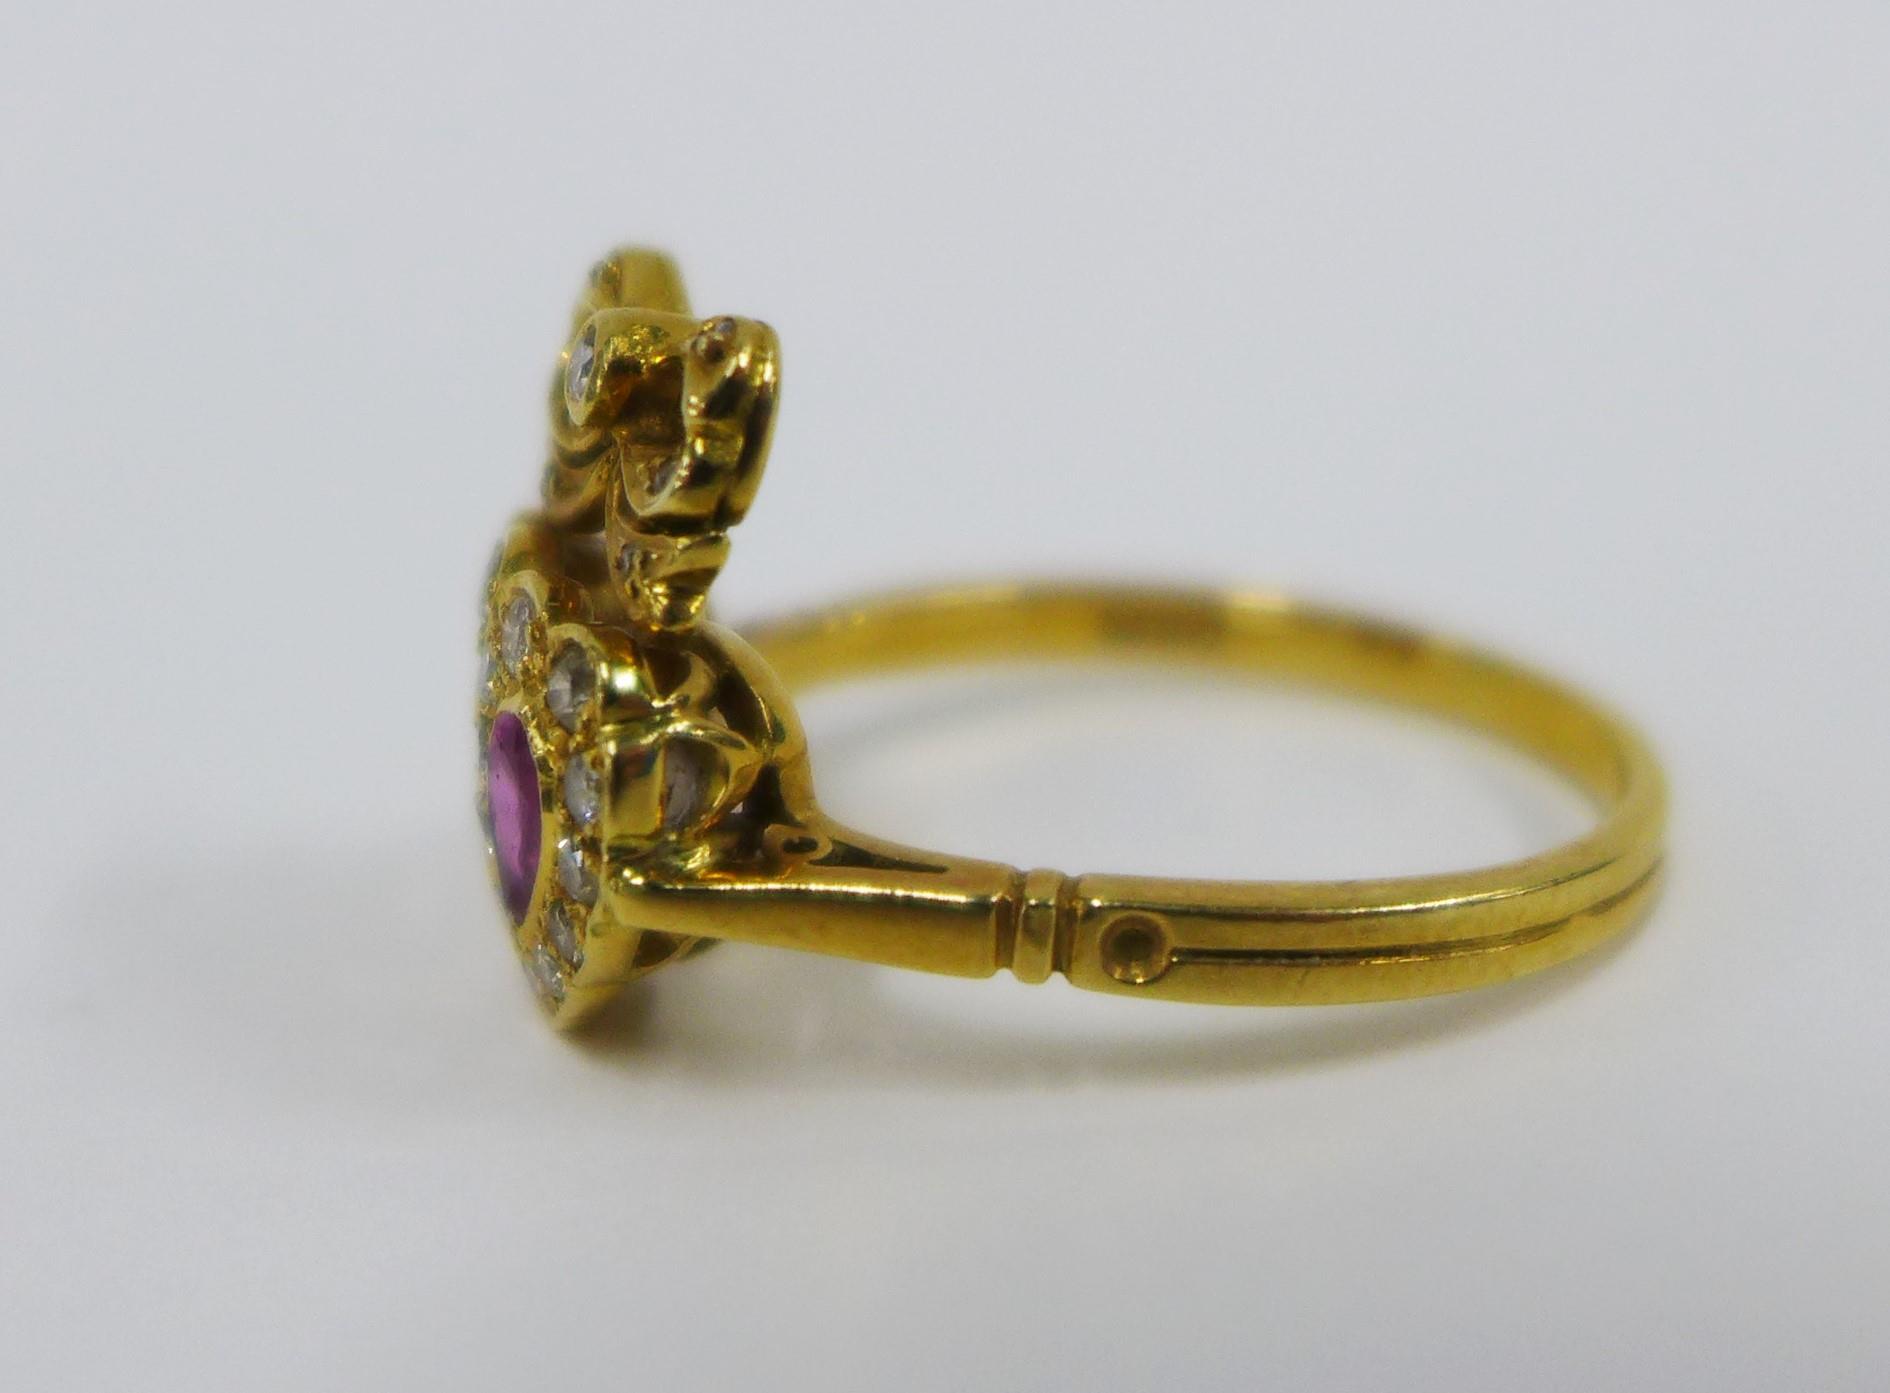 18ct gold ruby and diamond ring with a double heart and ribbon bow setting, London 1978 - Image 3 of 4